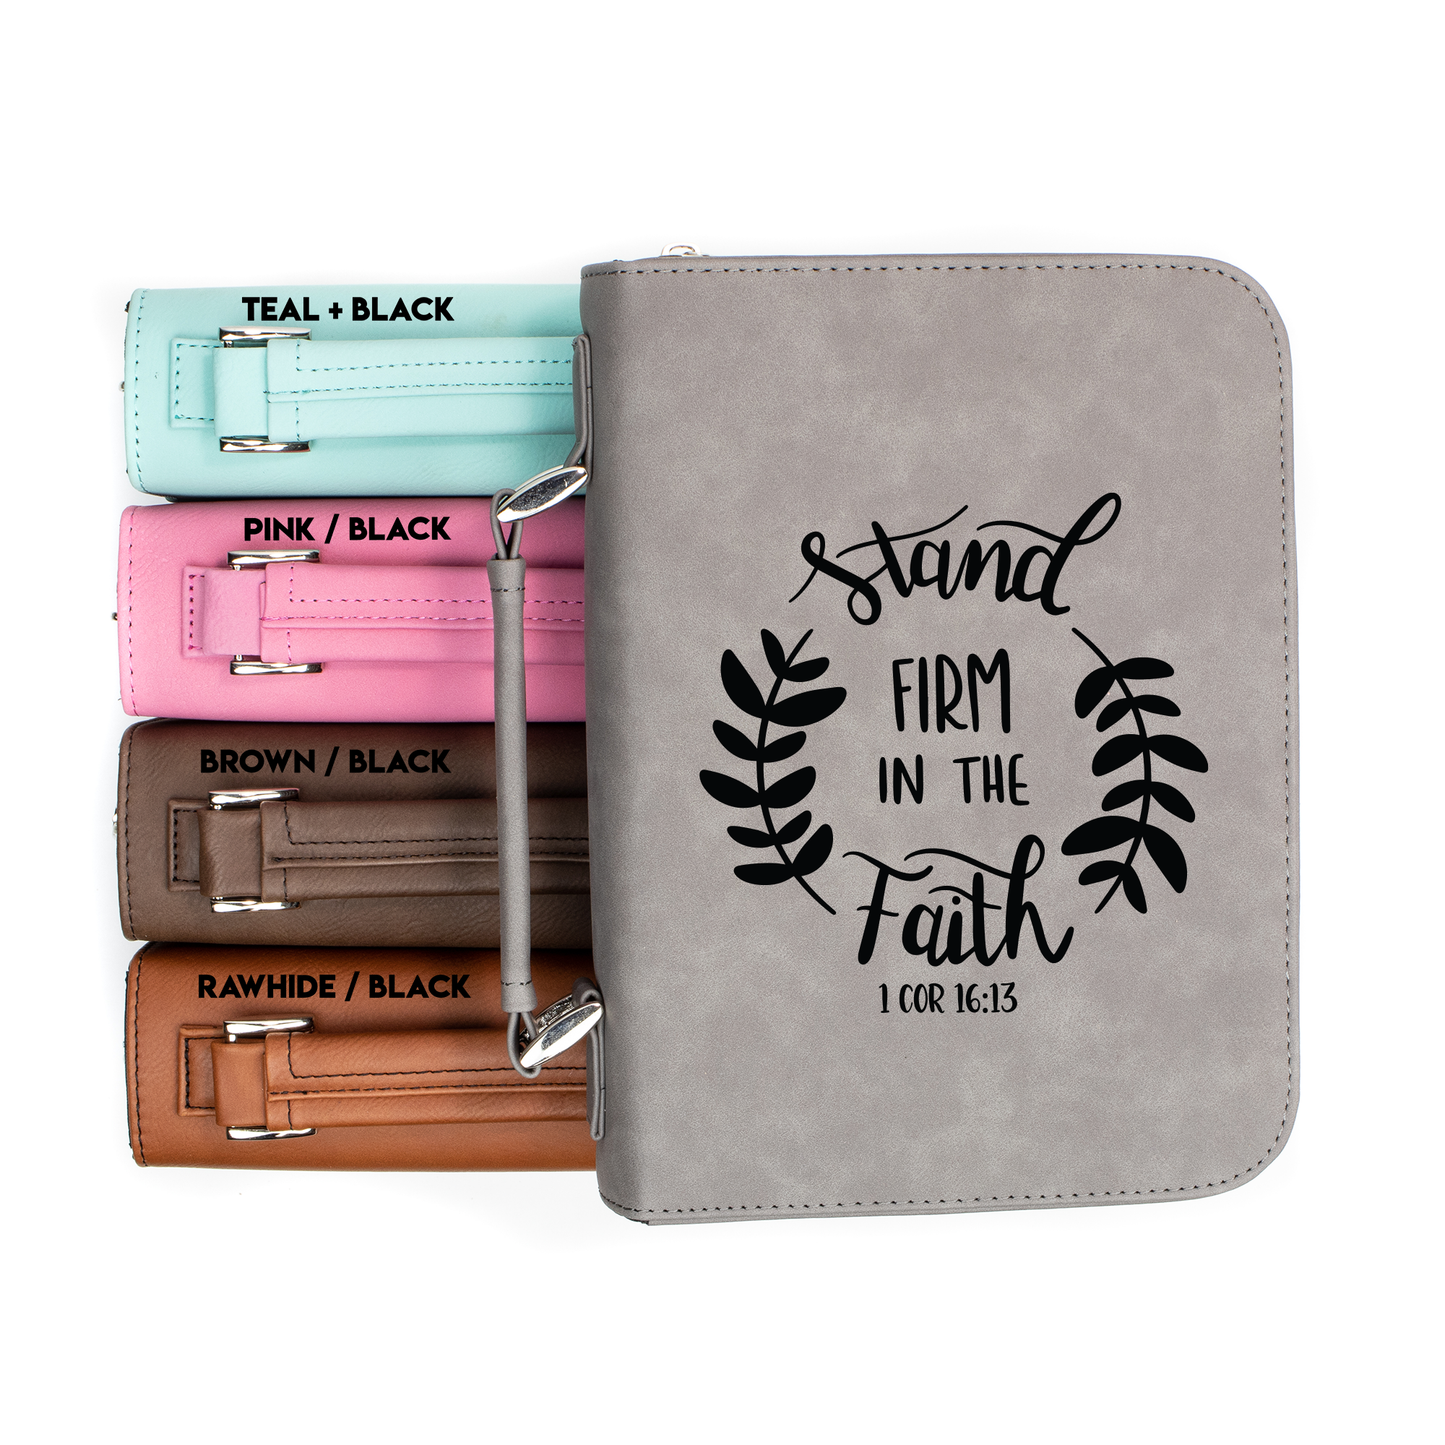 Stand Firm in the Faith 1 Corinthians 16-13 Bible Cover | Faux Leather With Handle + Pockets